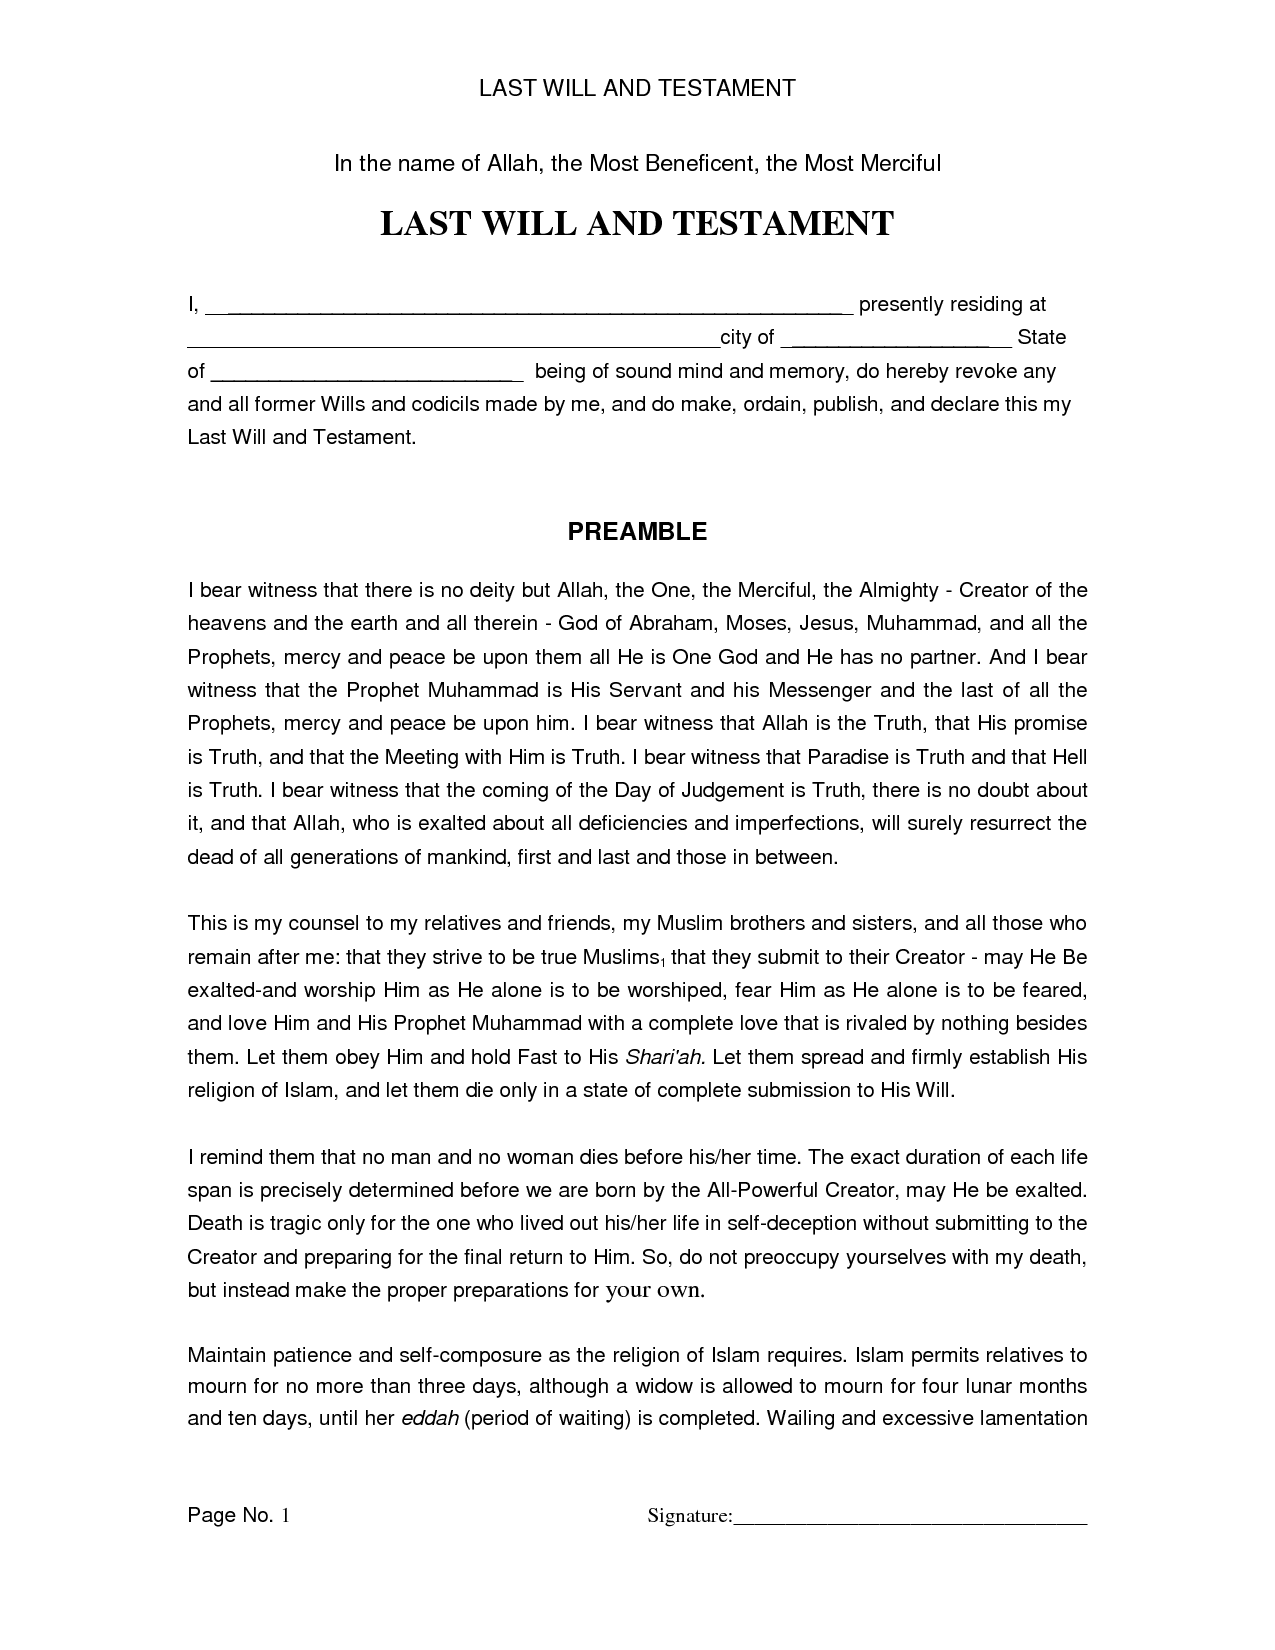 Last Will And Testament . Sample - Free Printable Documents